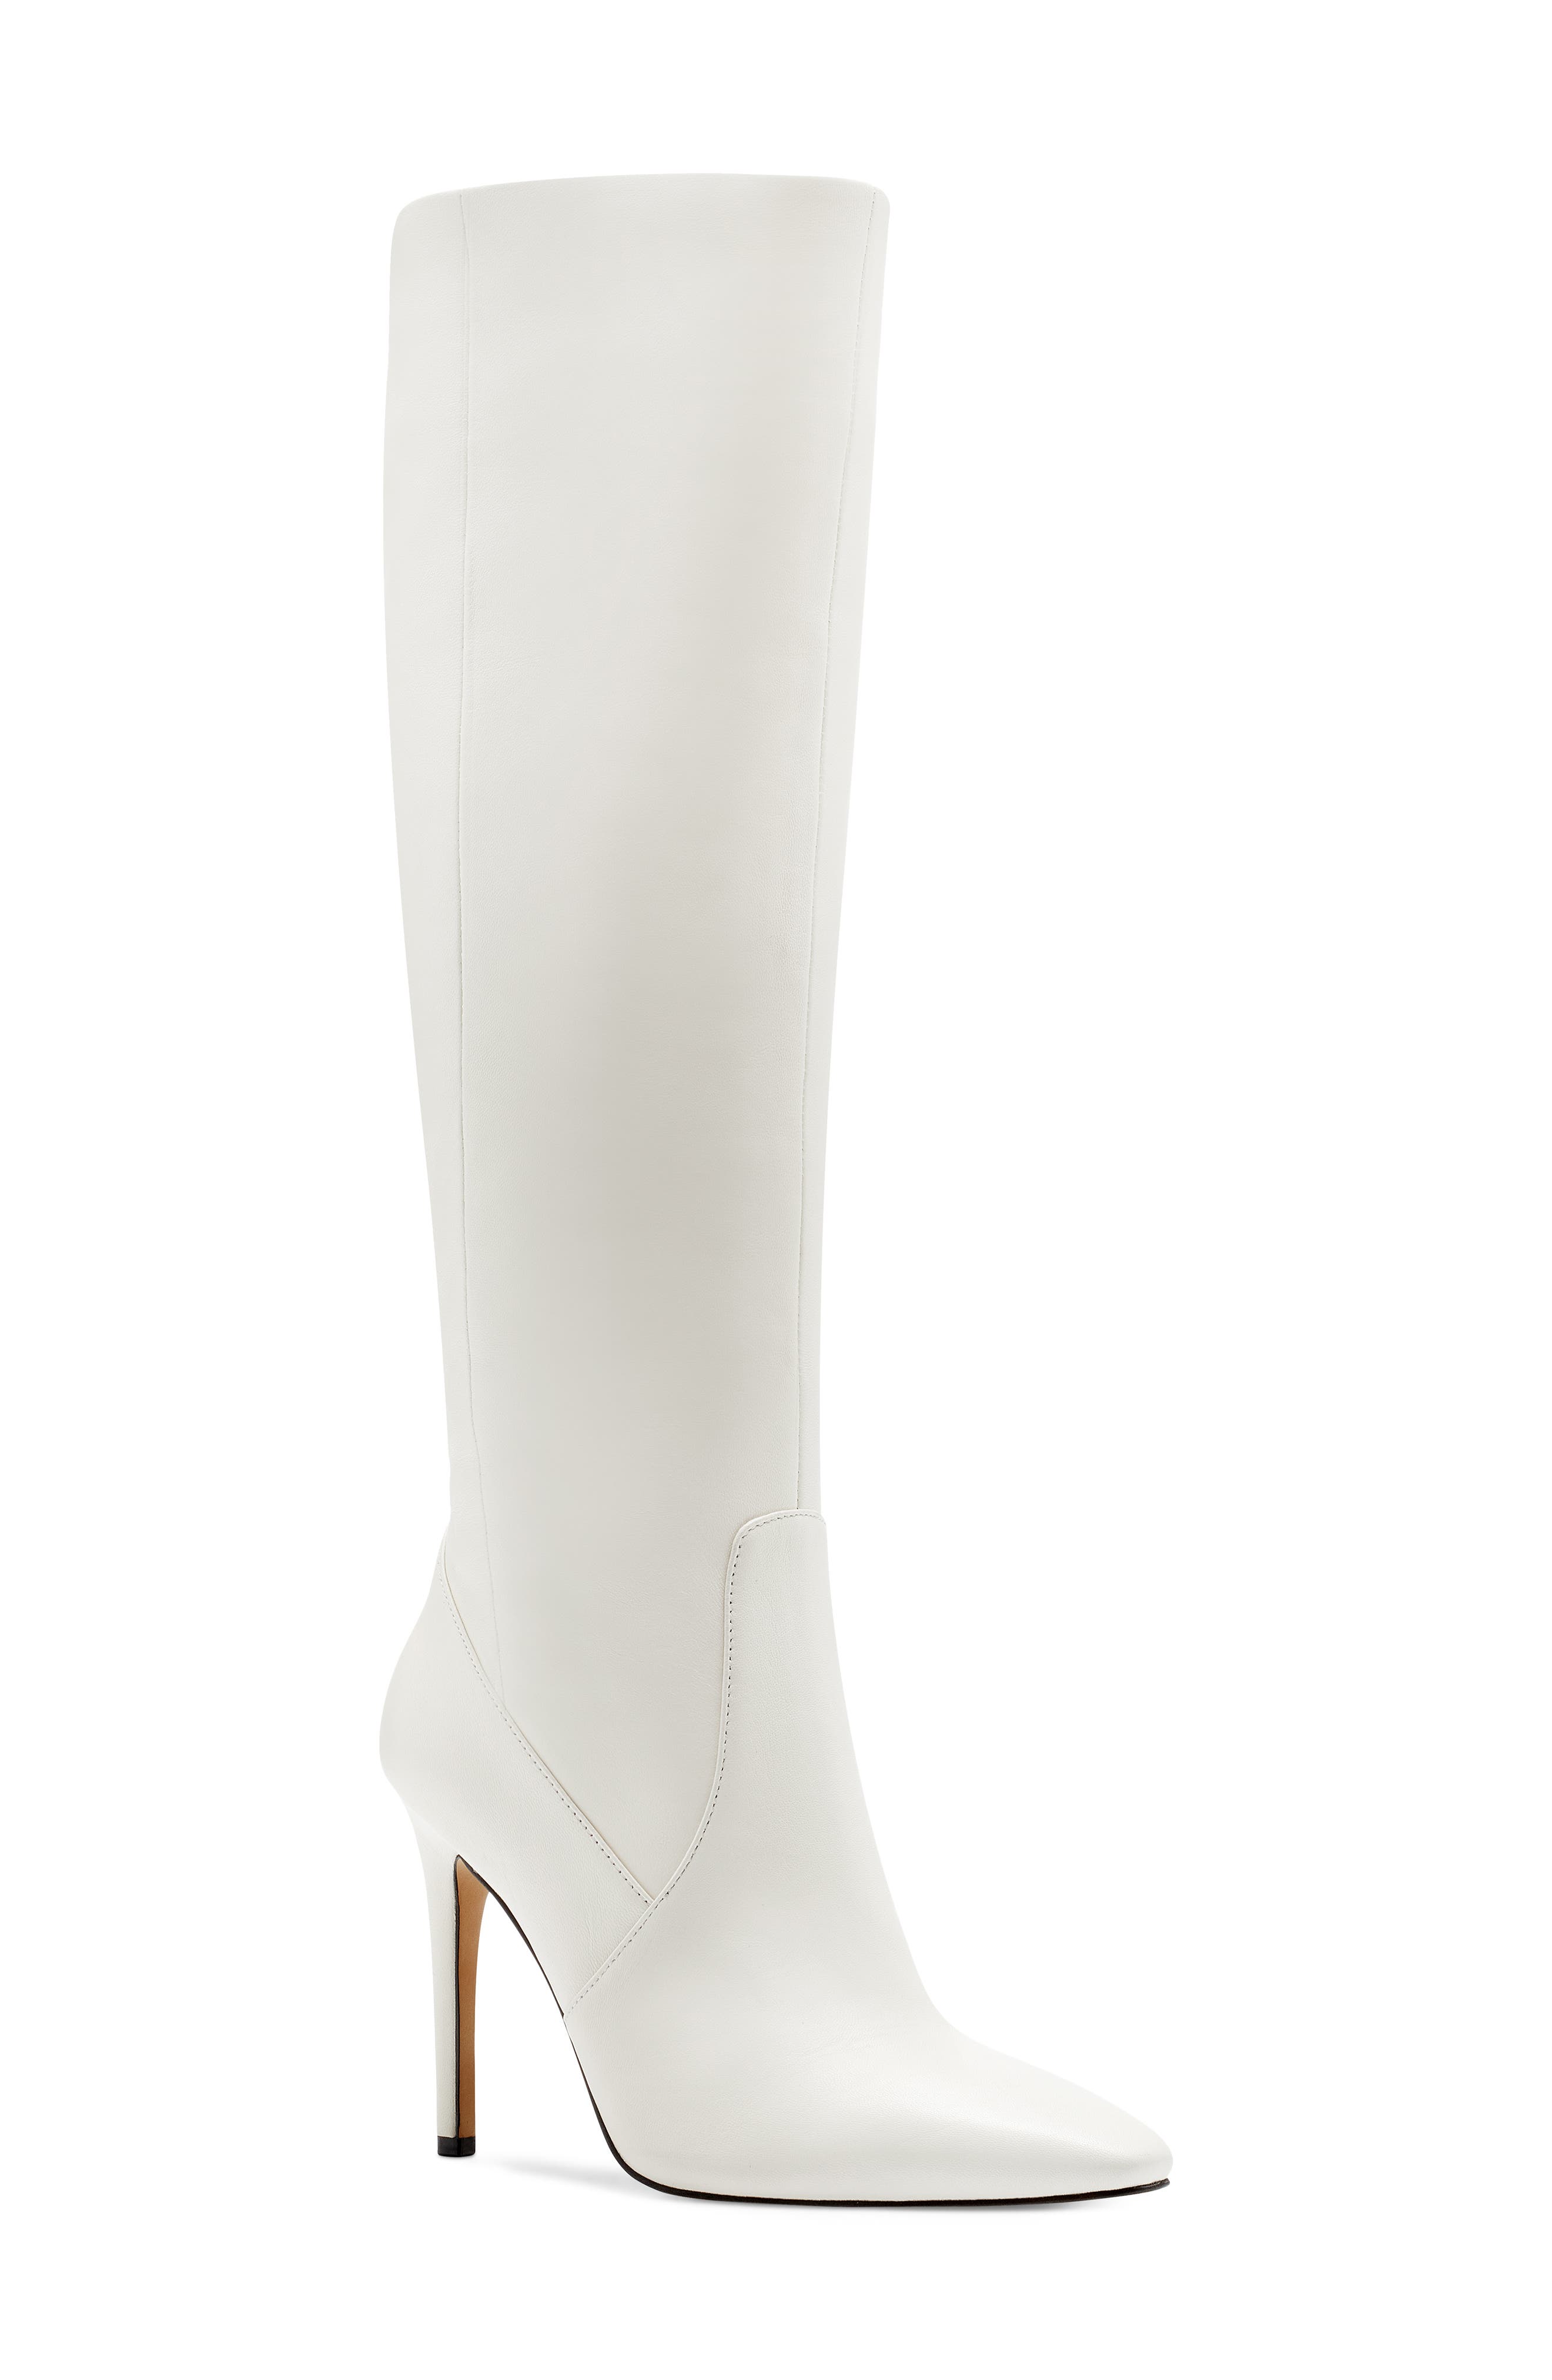 womens white knee high boots